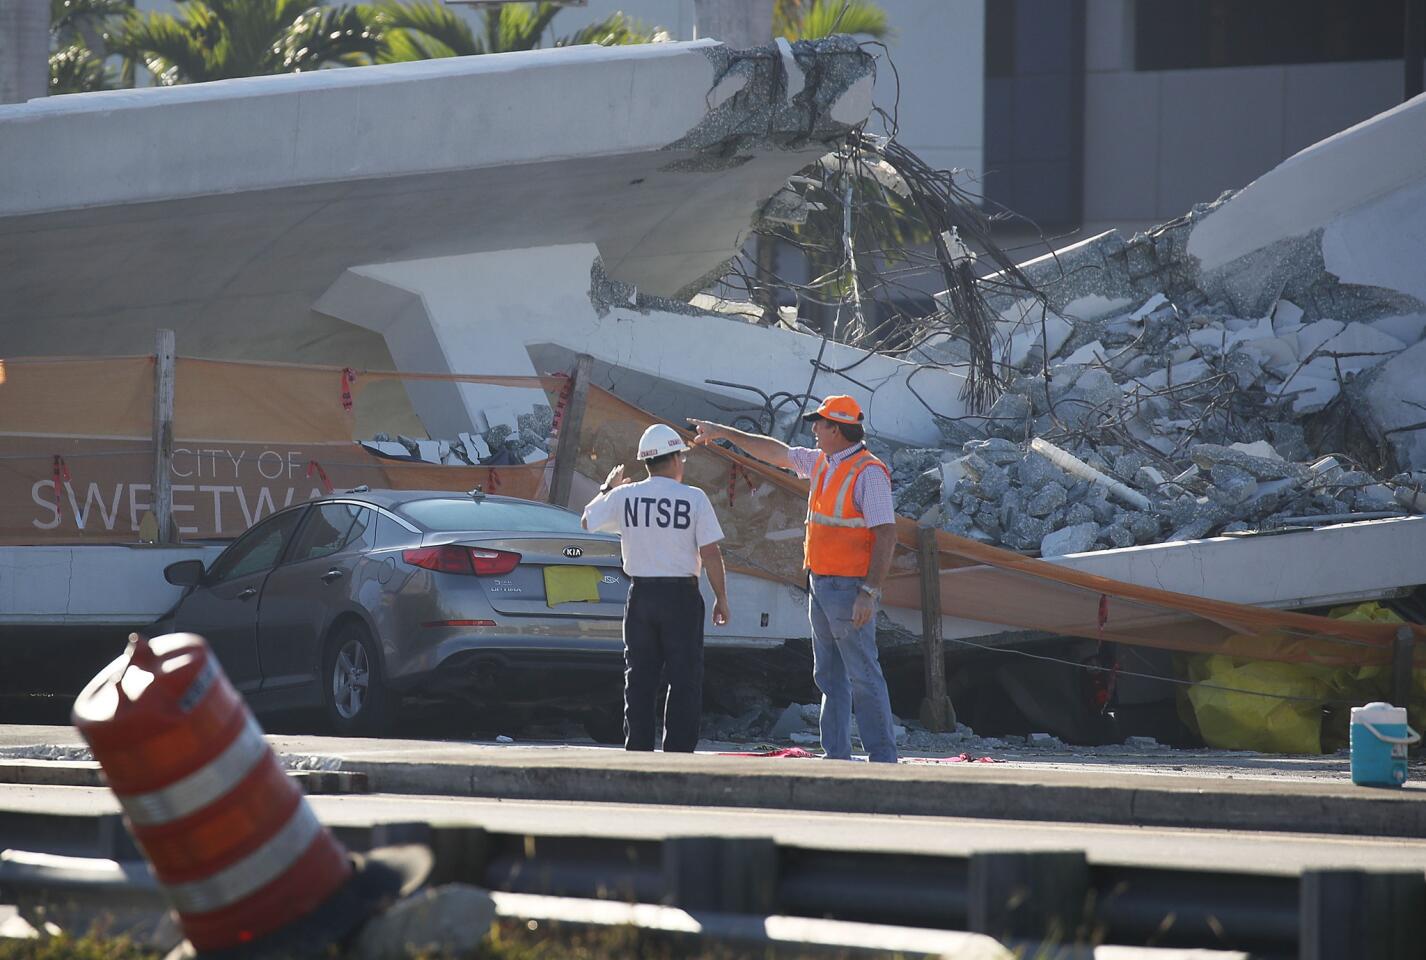 At Least 6 Dead After Collapse Of Pedestrian Bridge In Miami